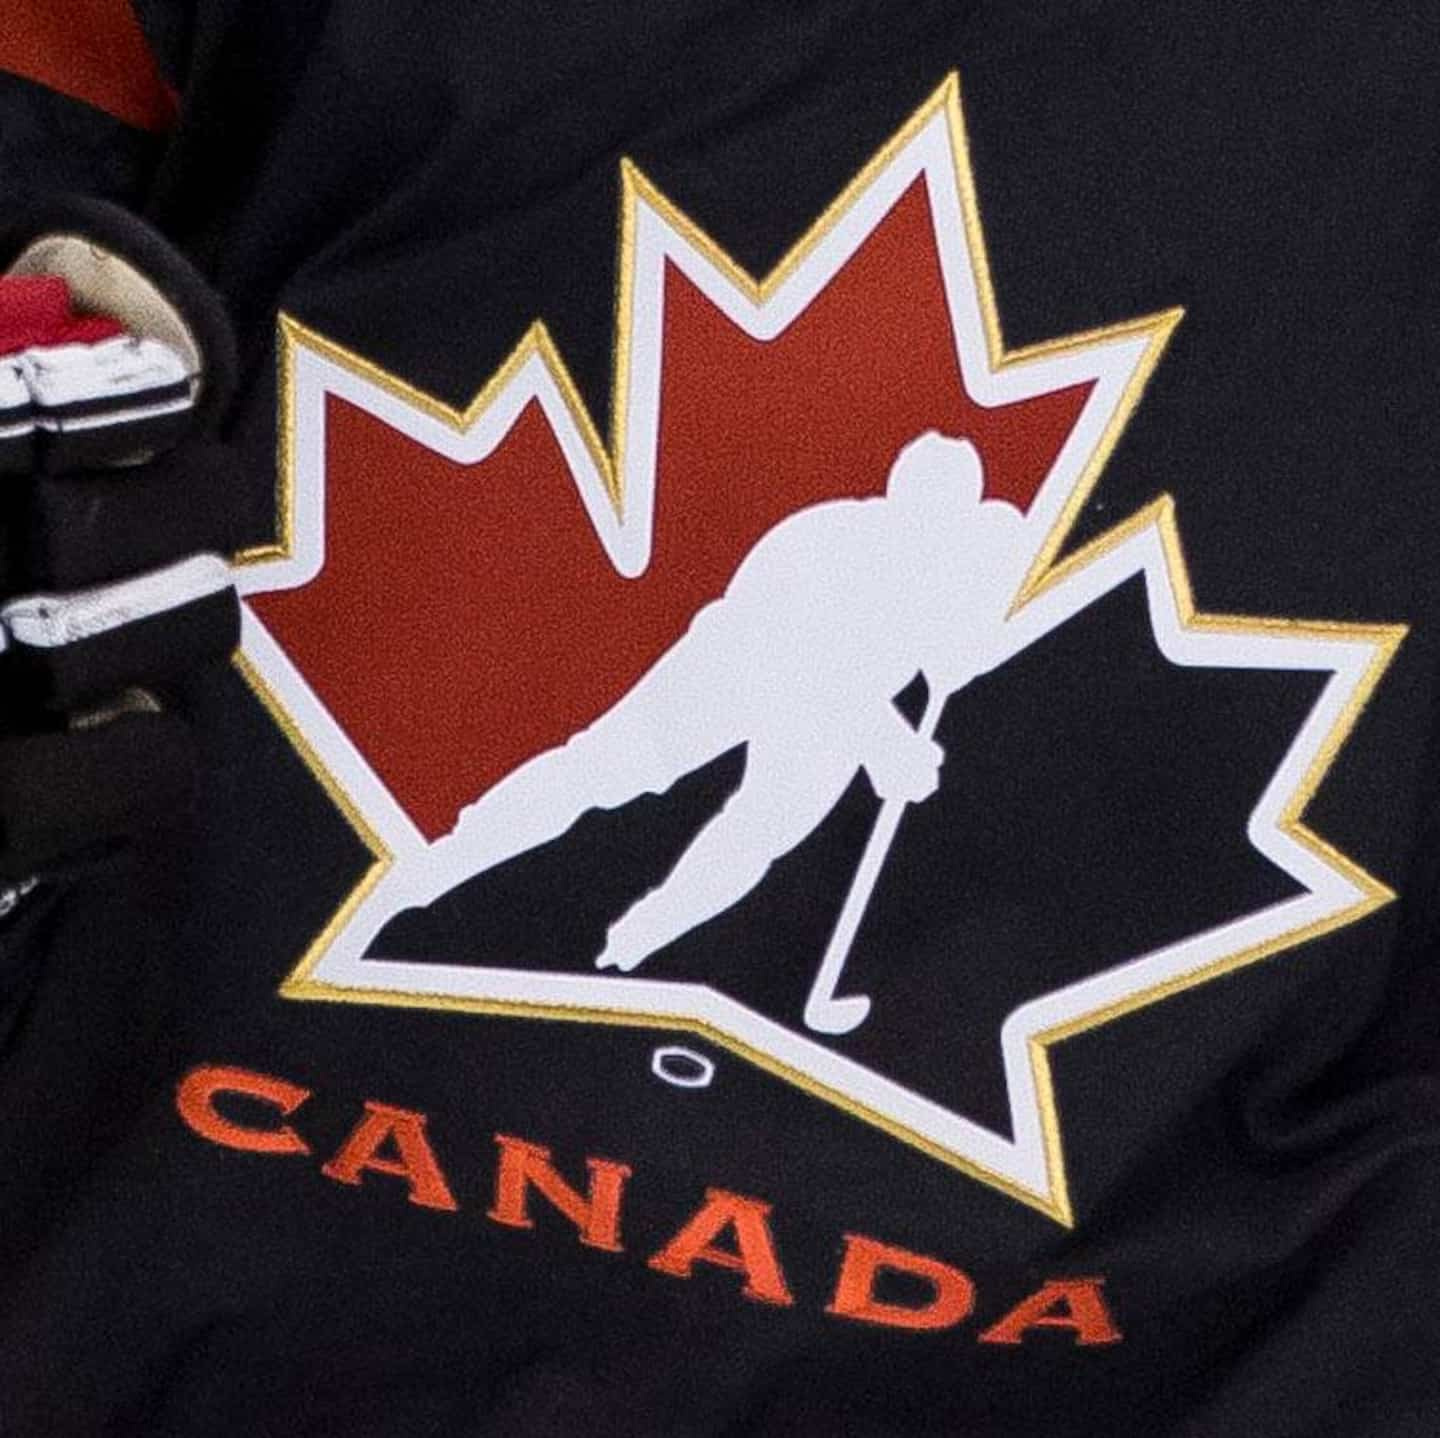 Seven players declined to participate in Hockey Canada's initial investigation